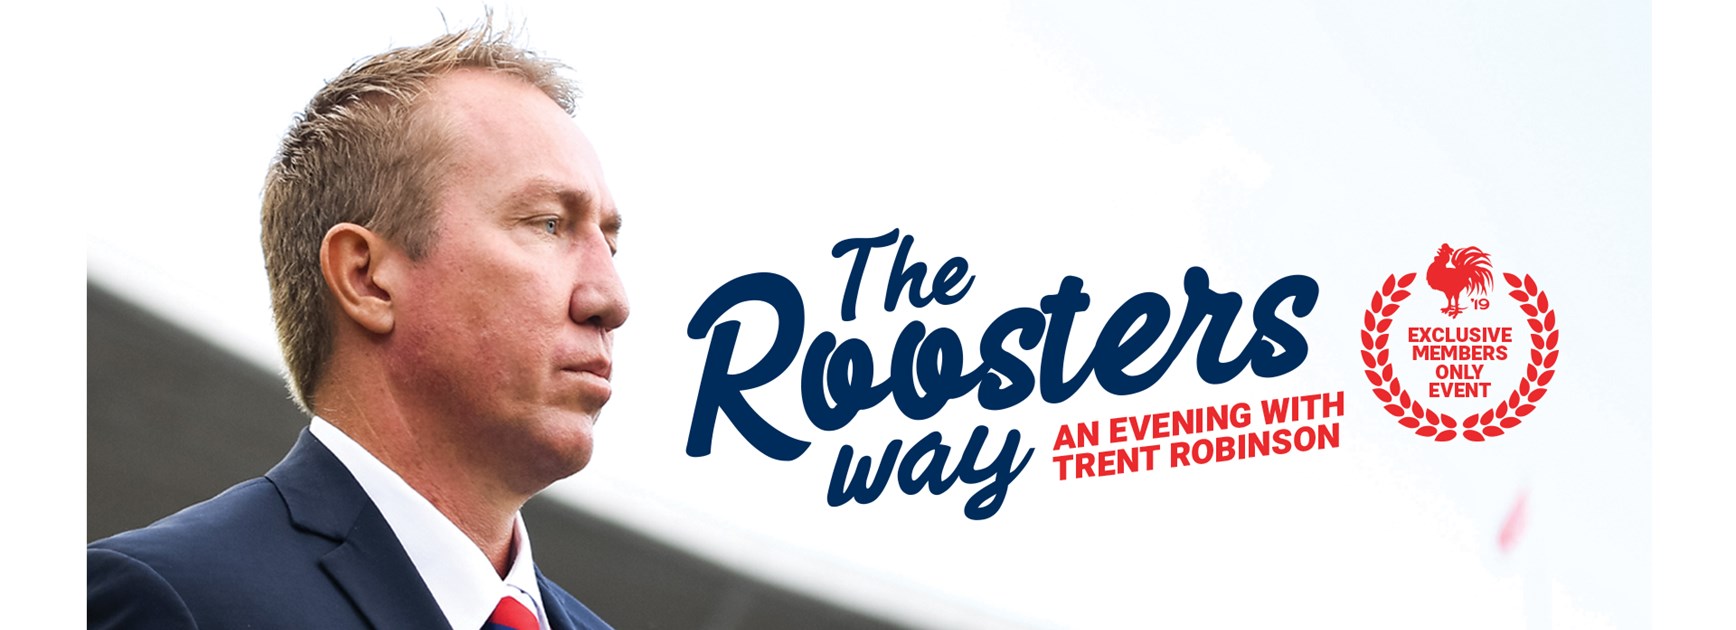 The Roosters Way | An Evening With Trent Robinson